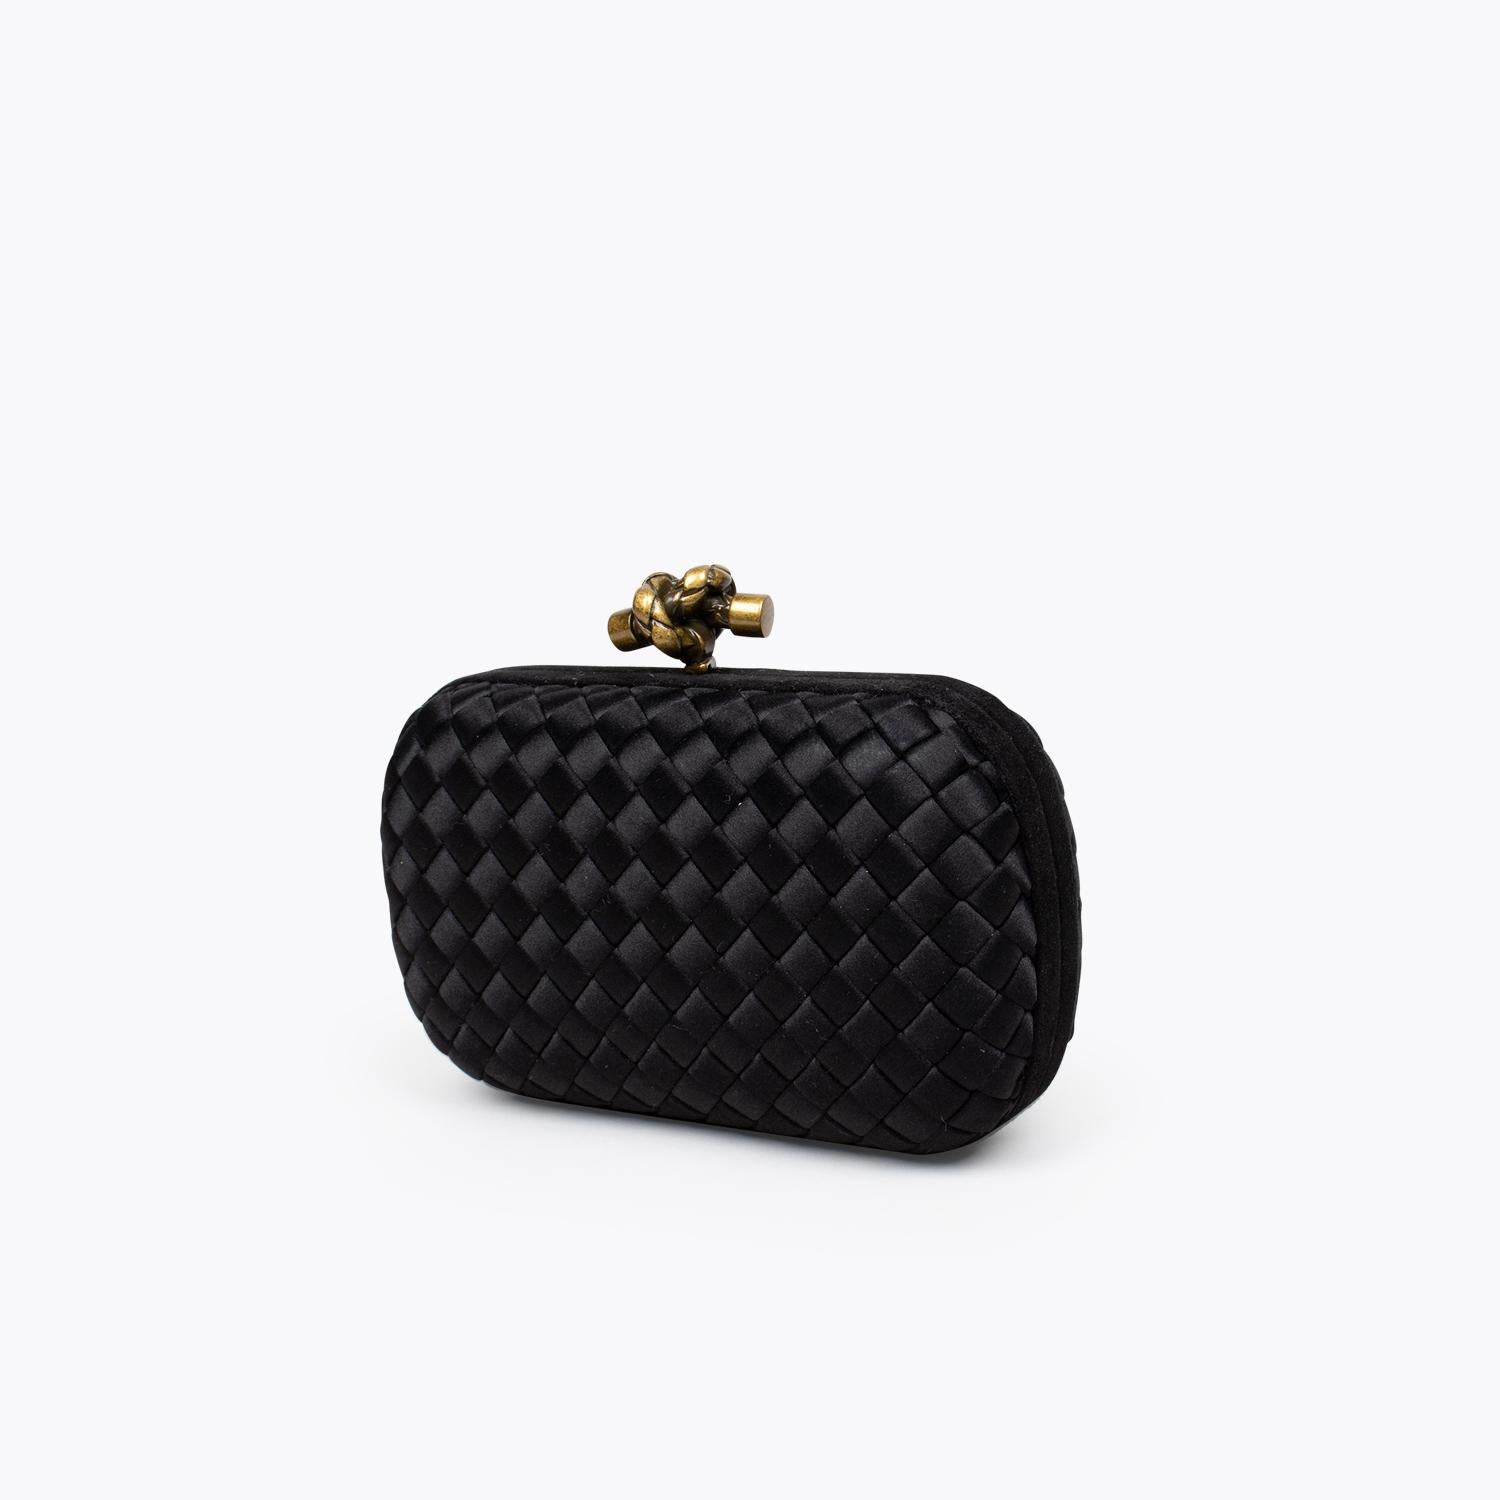 Black Intrecciato satin Bottega Veneta Knot clutch with

– Gold-antique tone hardware
– Tonal satin lining and push-lock closure at top.

Overall Preloved Condition: Very Good
Exterior Condition: Very Good. Minor surface scratches and marks